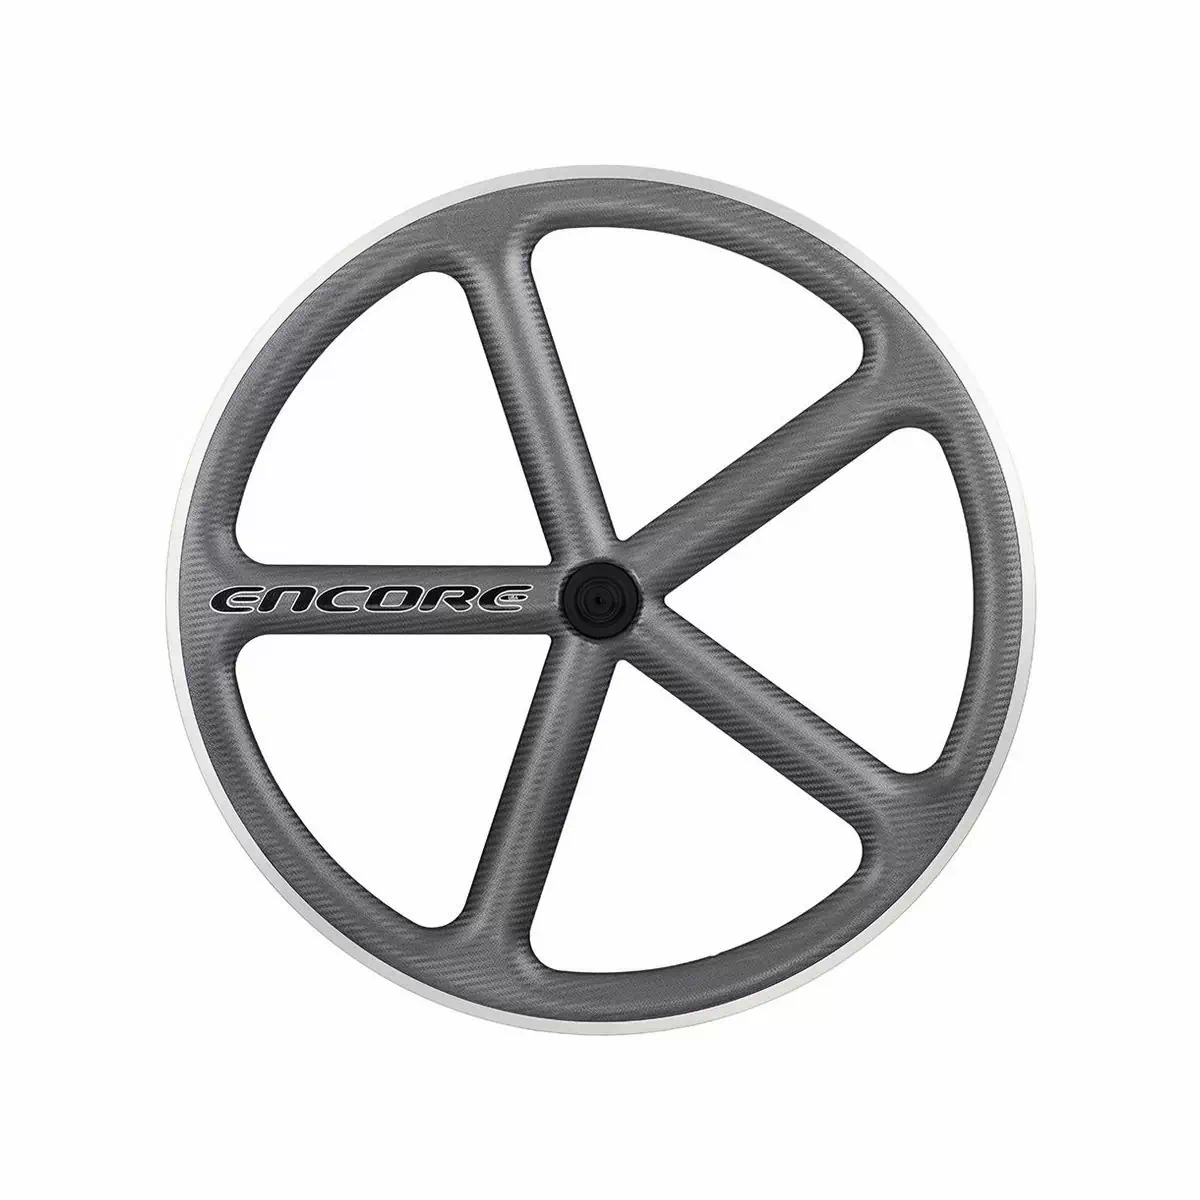 front wheel 700c track 5 spokes carbon weave charcoal msw - image